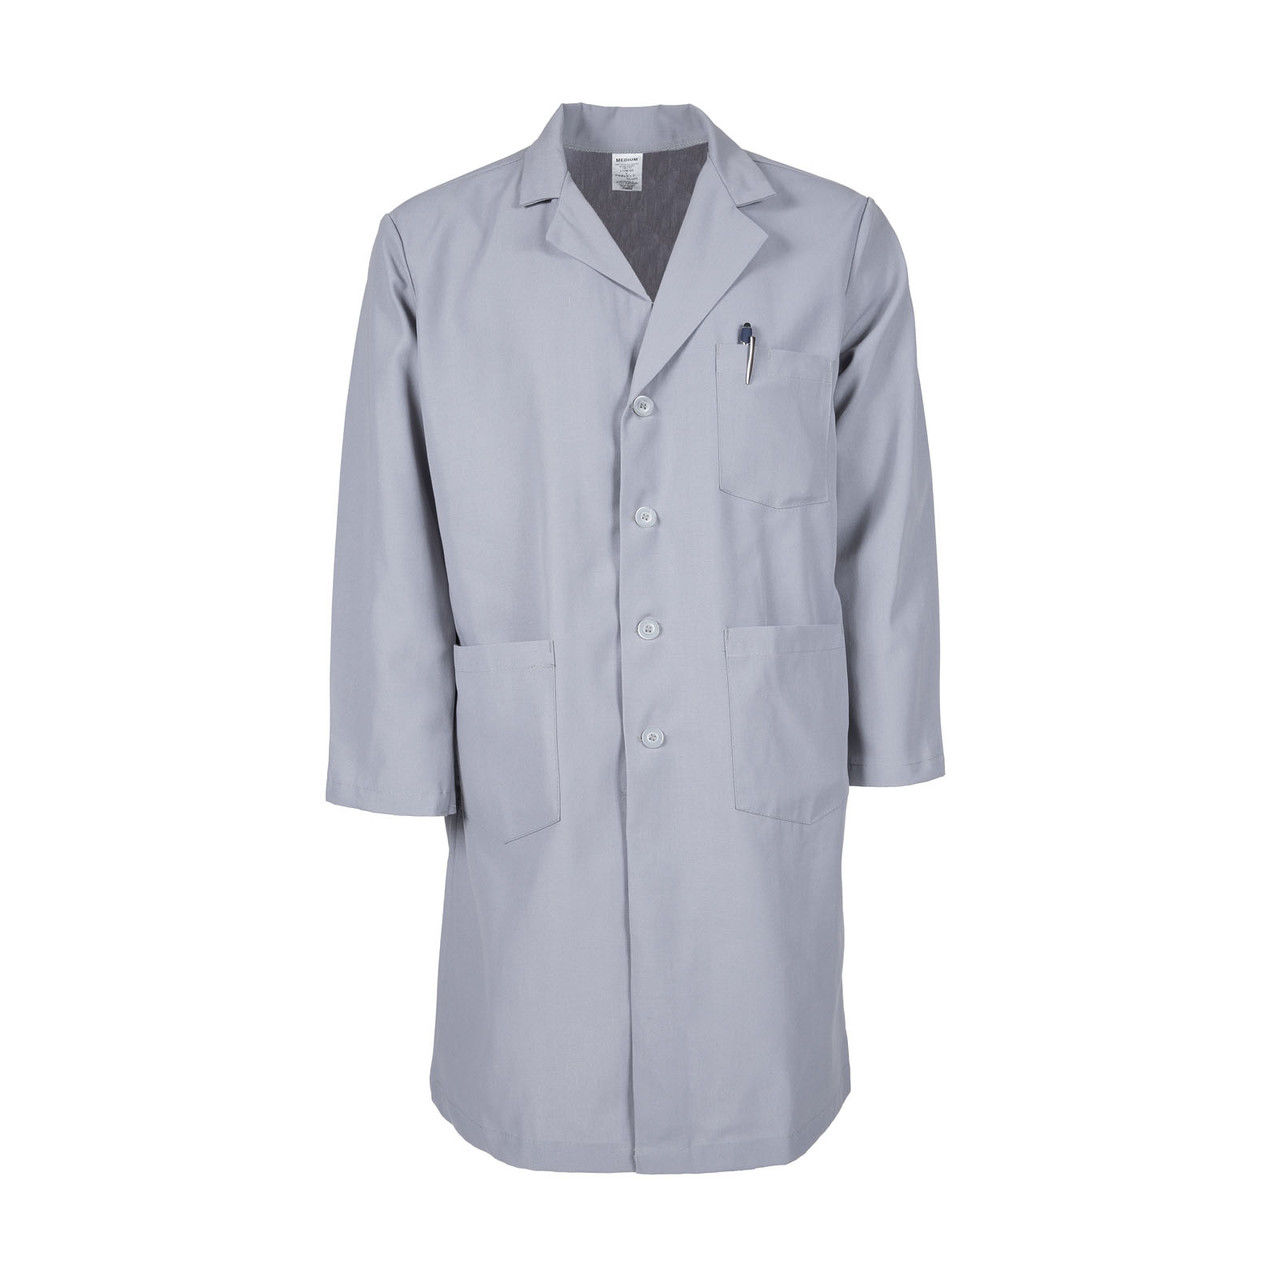 Does the Men's grey lab coat have a button closure?